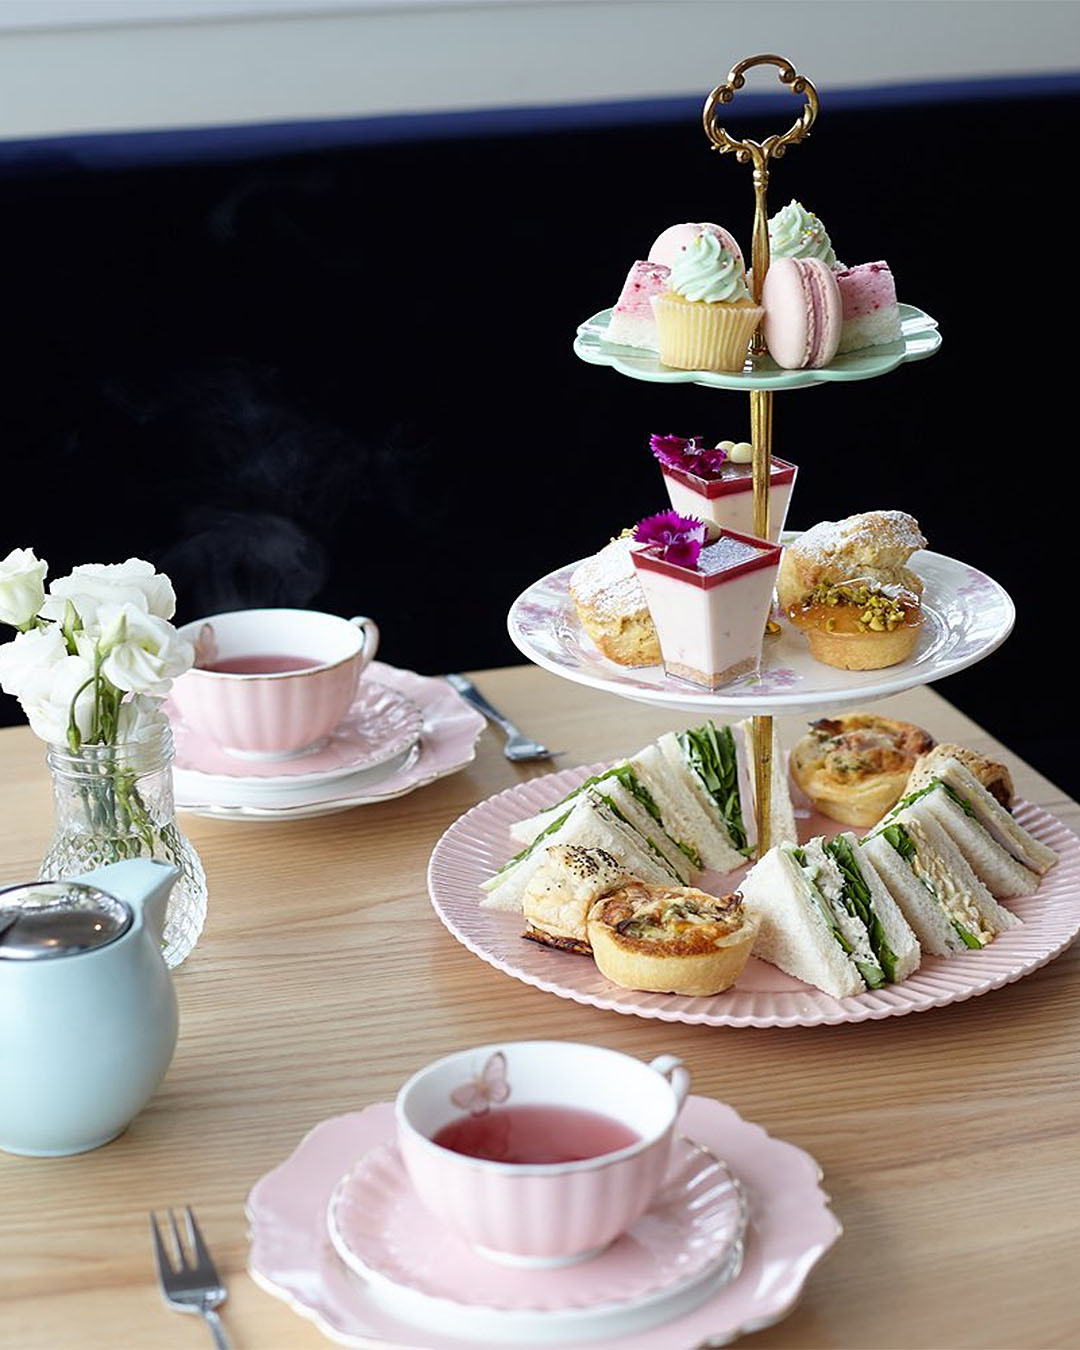 A delicious tower of food at Bluebells Cakery, one of the best high teas in Auckland.